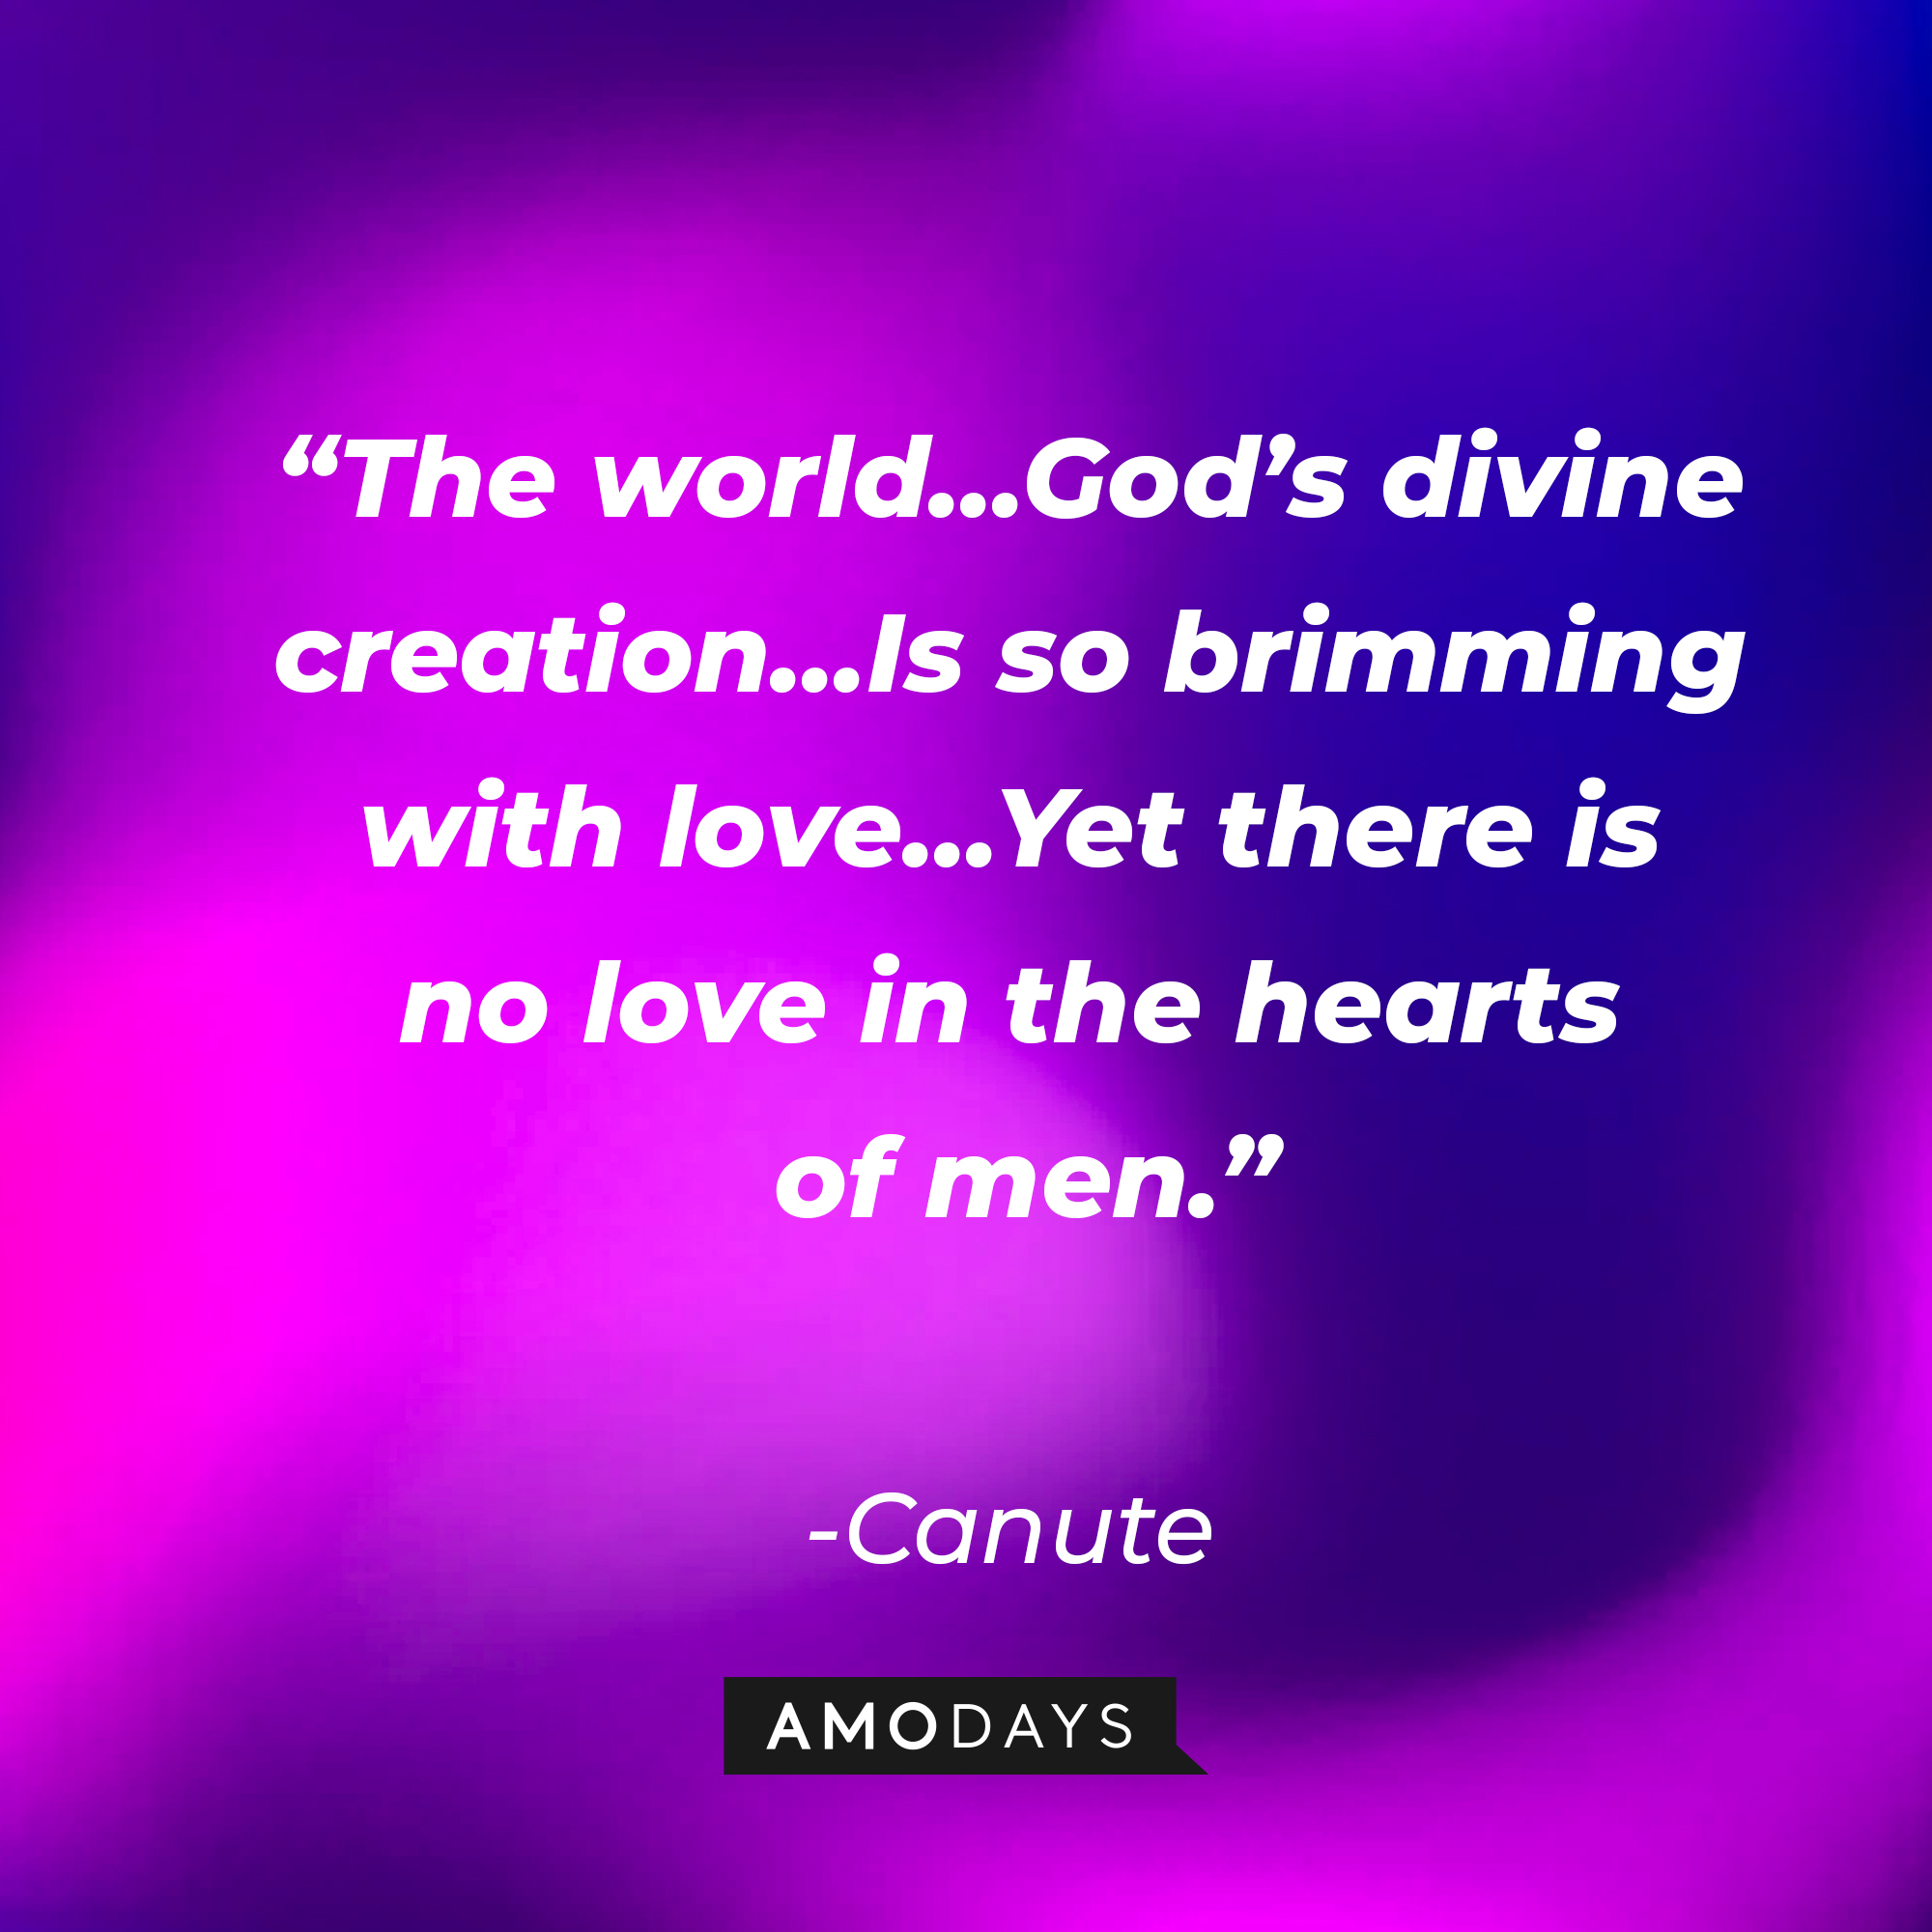 Canute’s quote: “The world…God’s divine creation…Is so brimming with love…Yet there is no love in the hearts of men.” | Source: Amodays